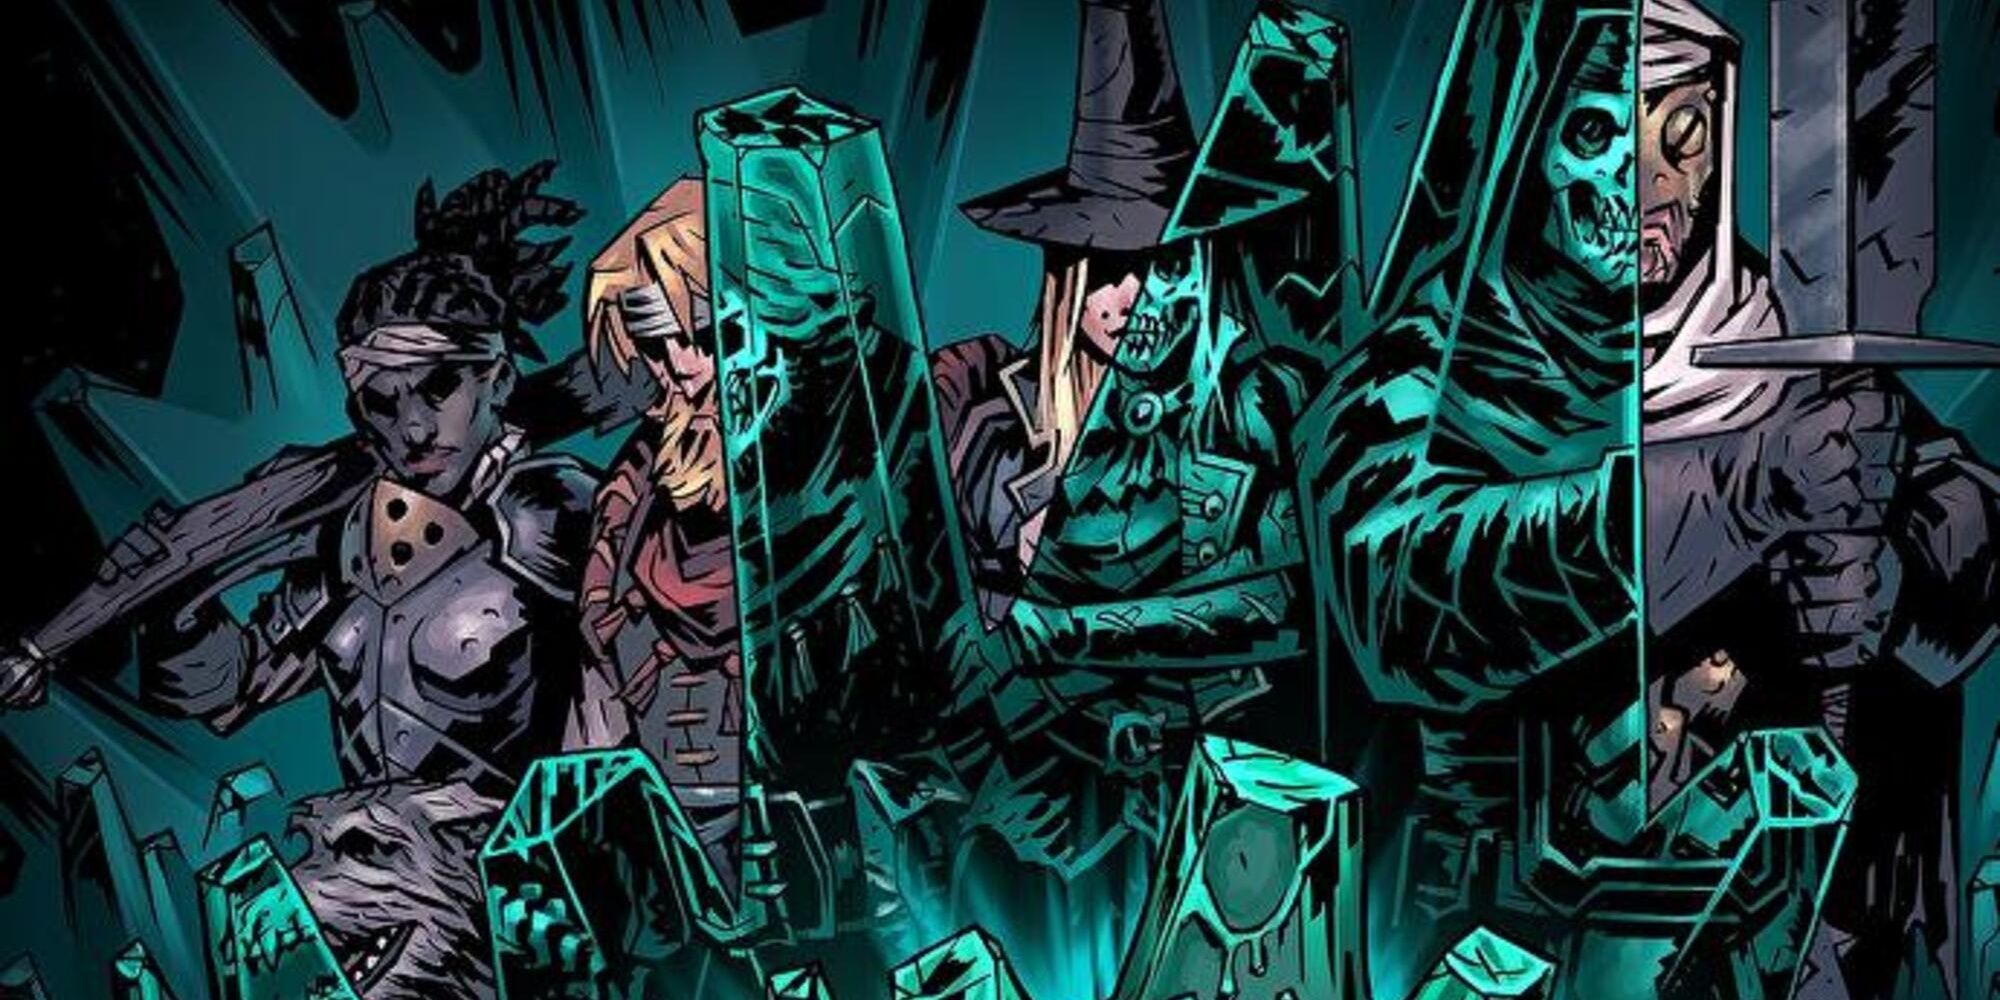 Arbalest, Houndmaster, Grave Robber, and Leper in promotional art for Darkest Dungeon's 